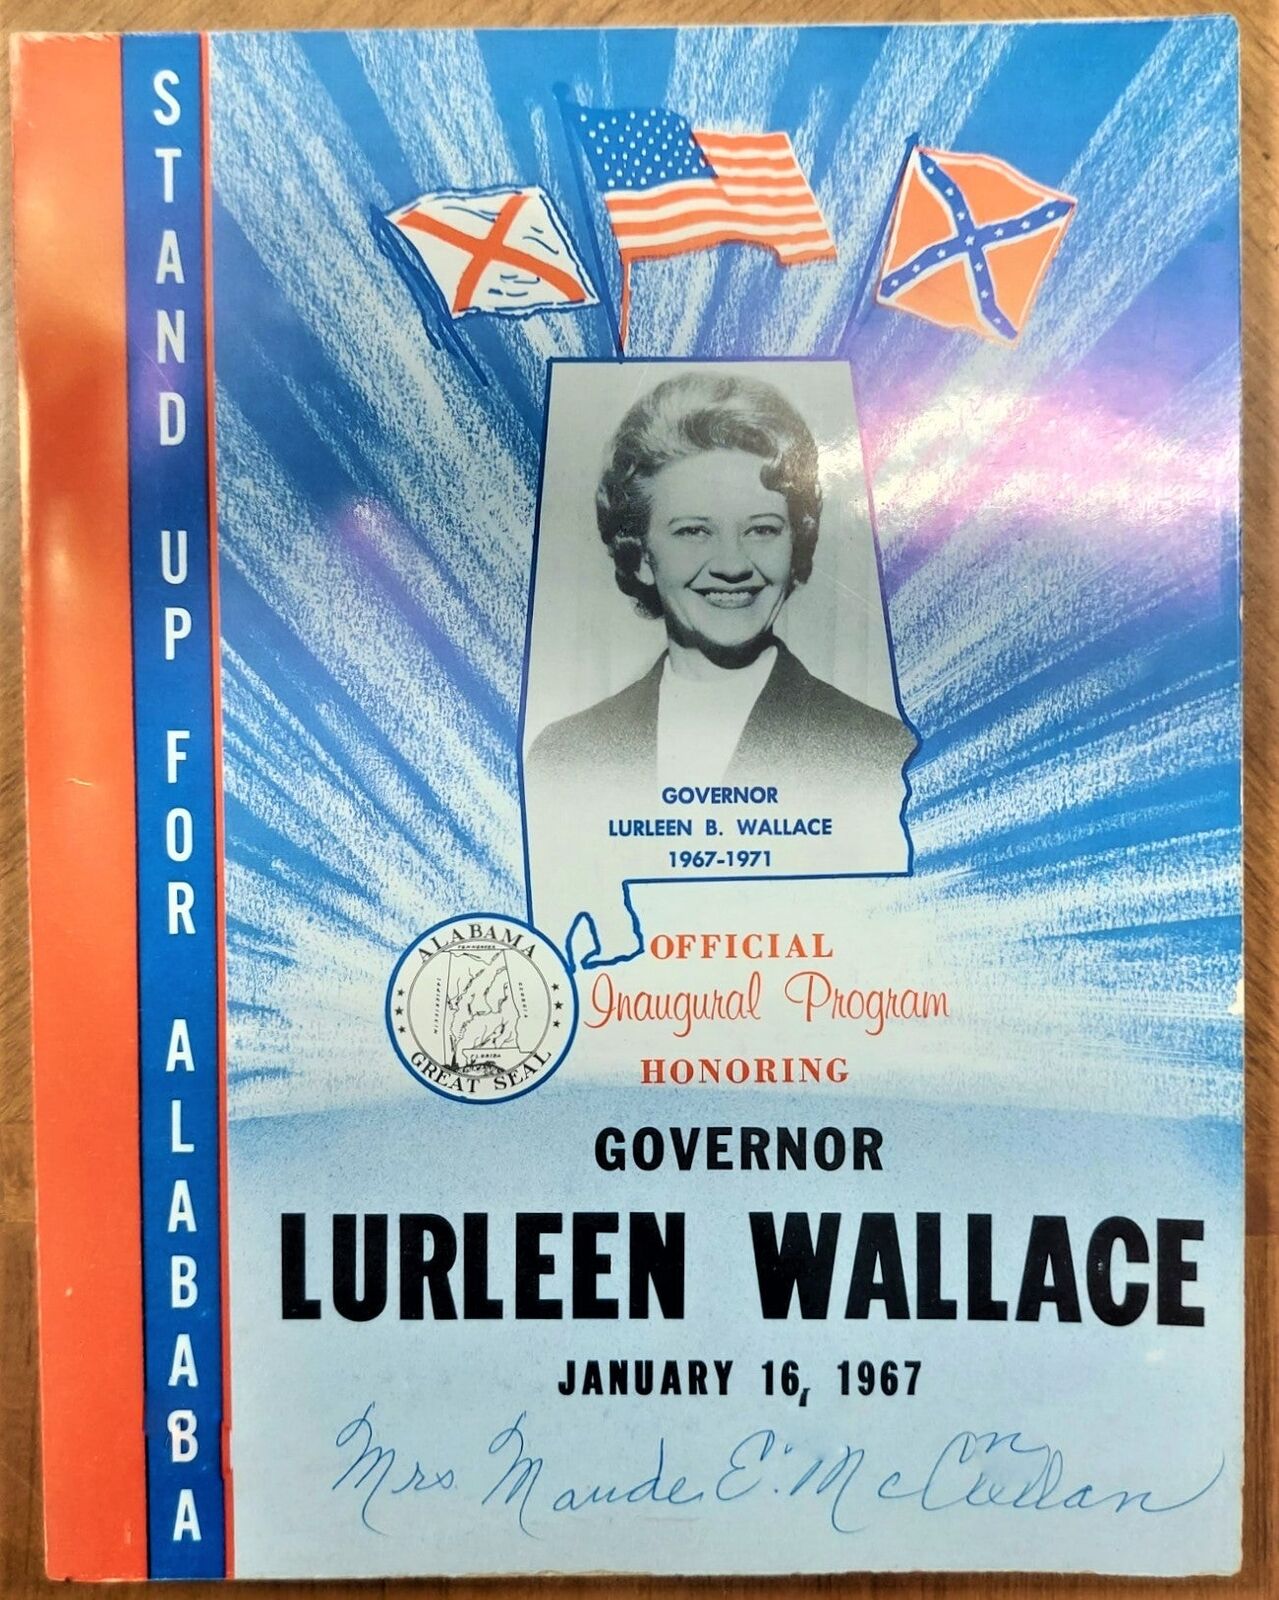 Official Inaugural Program Honoring Governor Lurleen Wallace - Jan 16, 1967